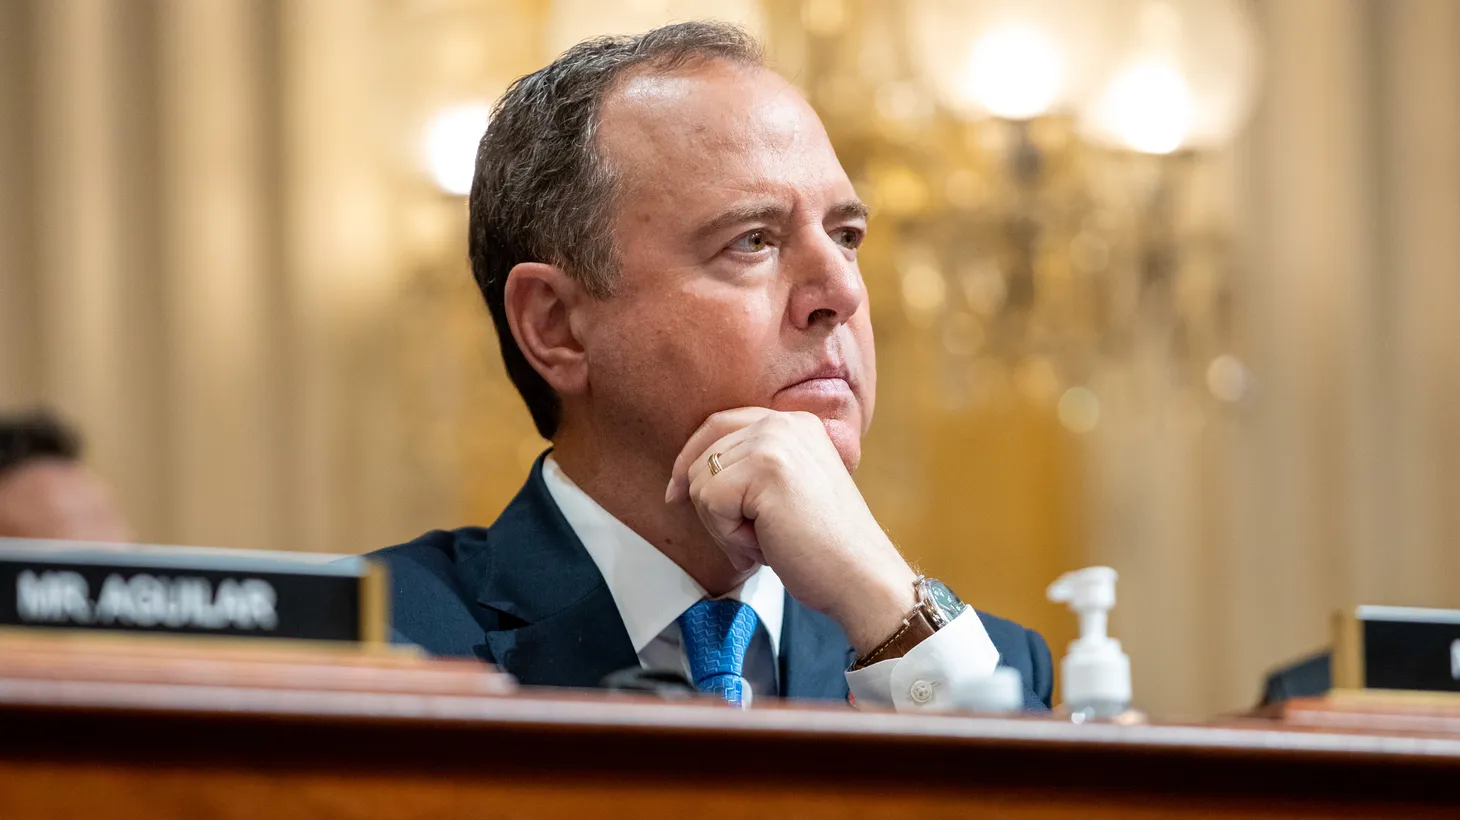 Rep. Adam Schiff, D-Calif., listens during a House Select Committee hearing on the January 6 insurrection at the U.S. Capitol in Washington, D.C., Tuesday, July 12, 2022.